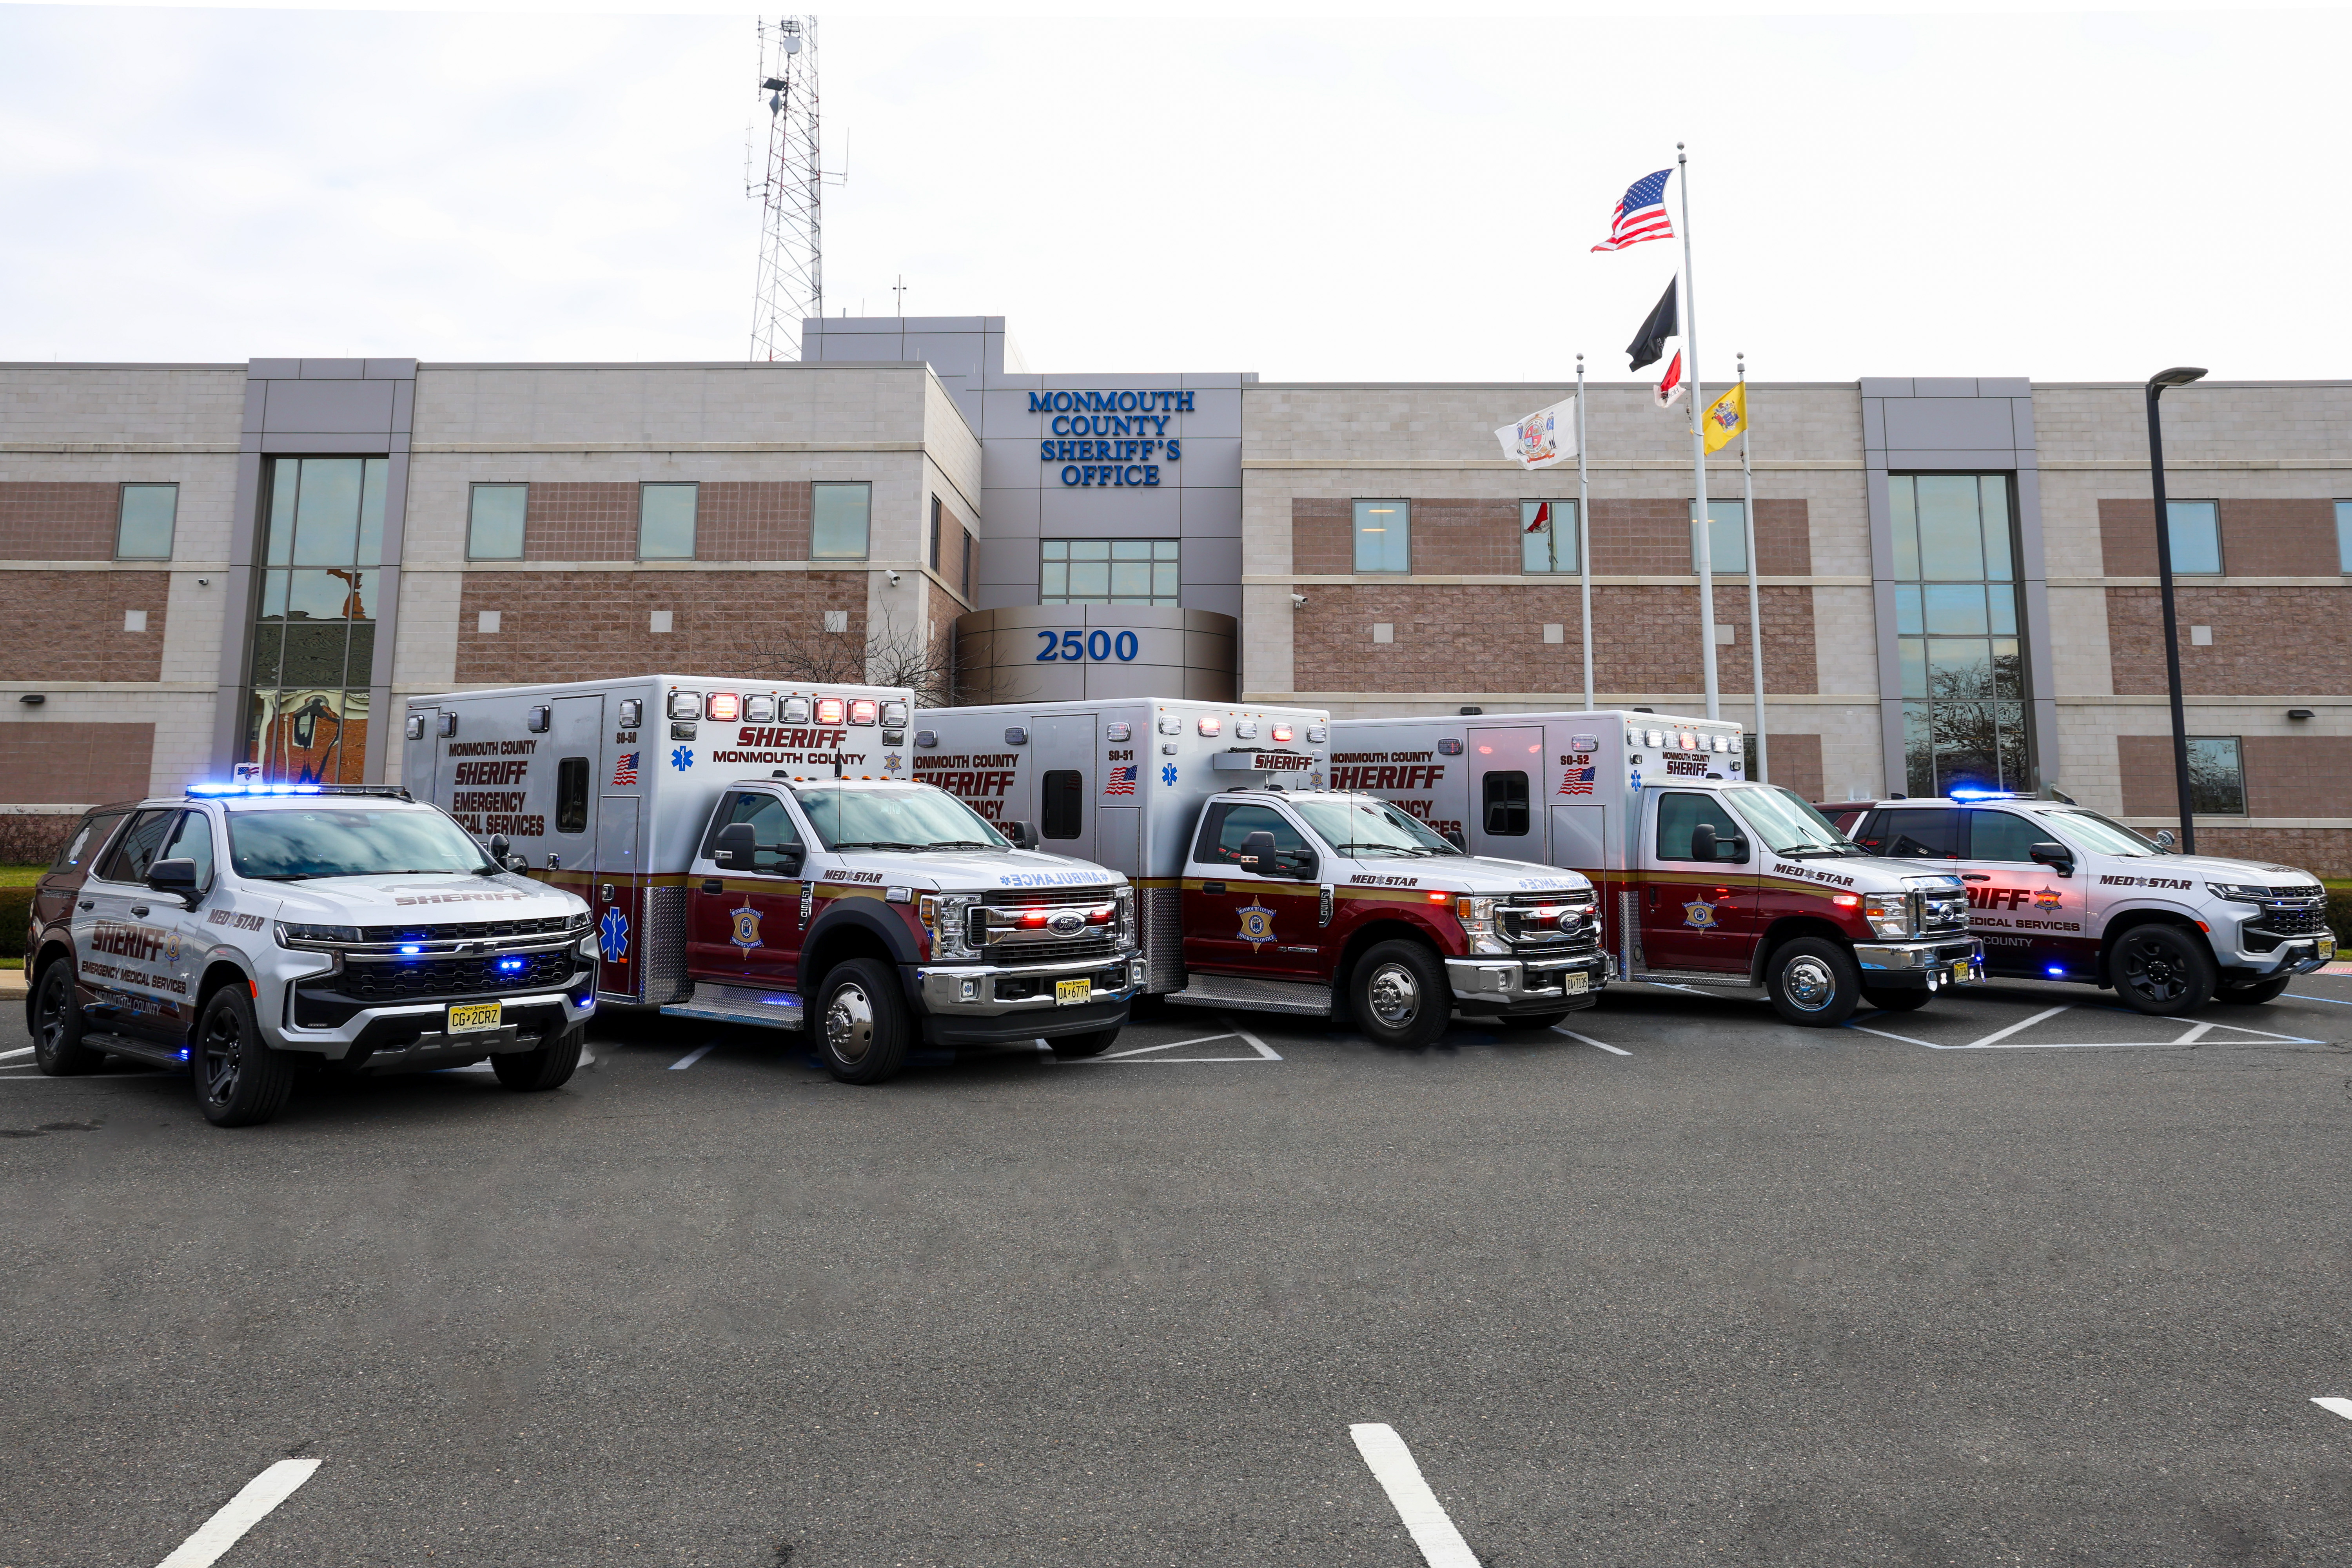 Tinton Falls, NJ - Emergency Medical Services - Monmouth County Sheriff's  Office